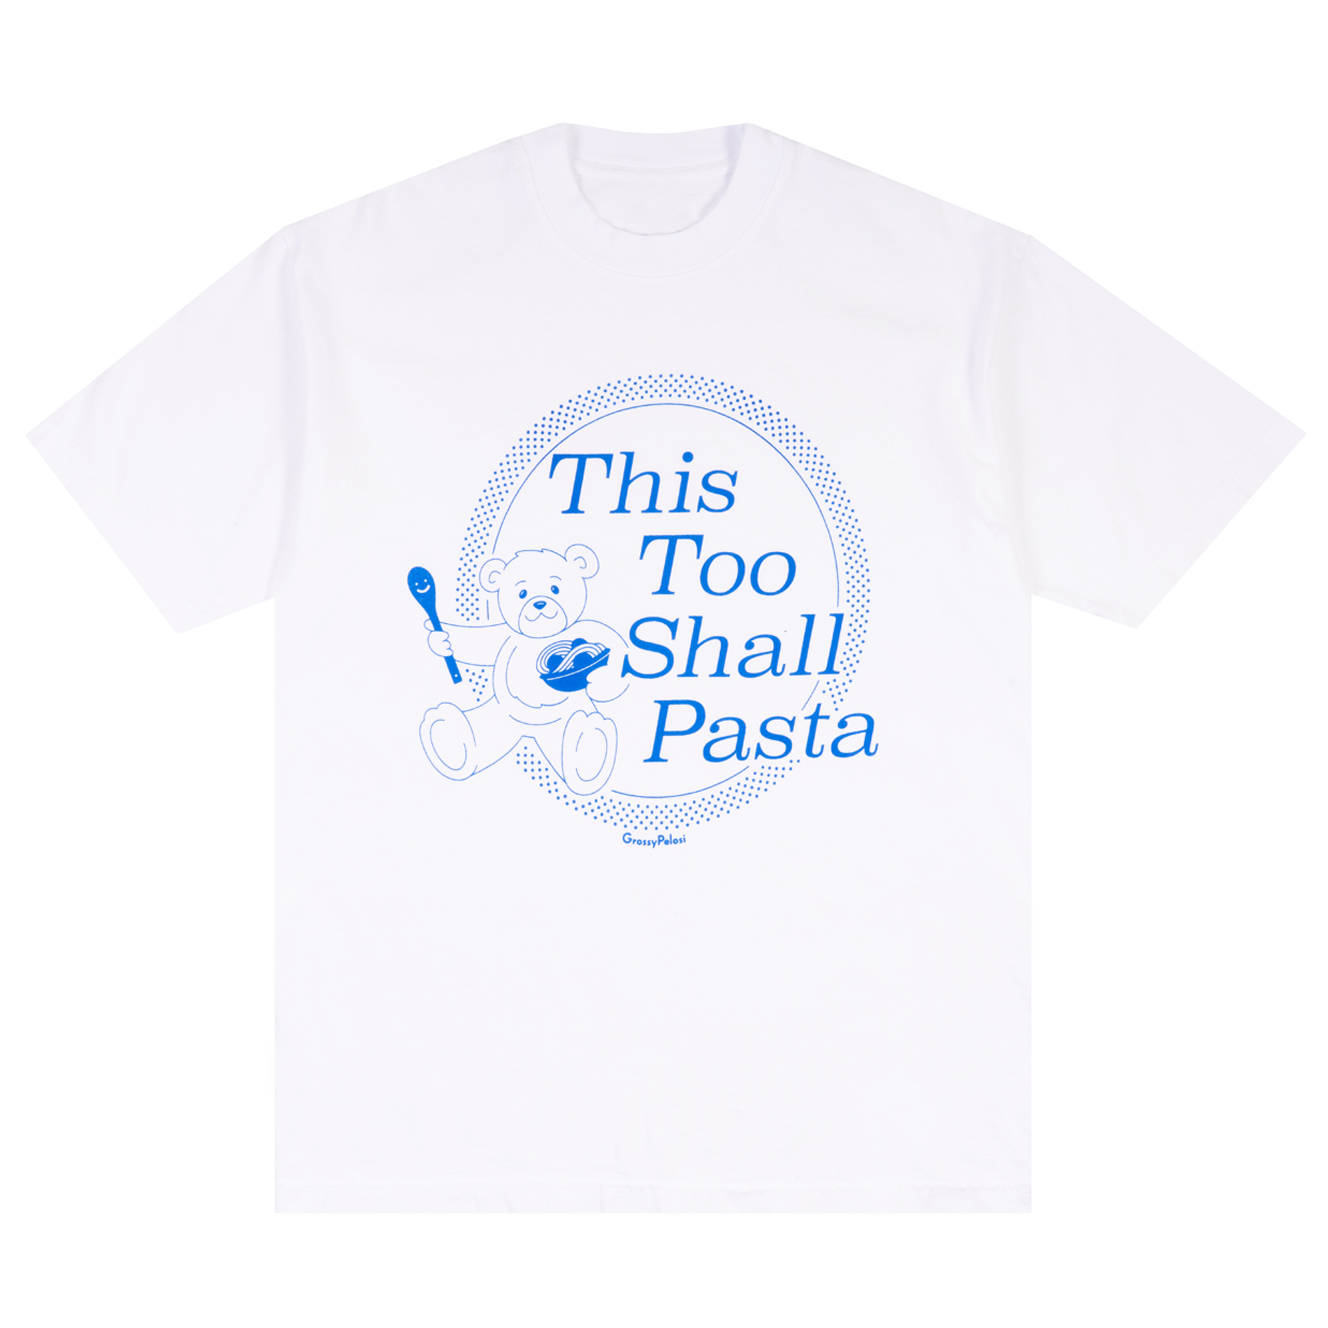 The Original This Too Shall Pasta Adult T-Shirt